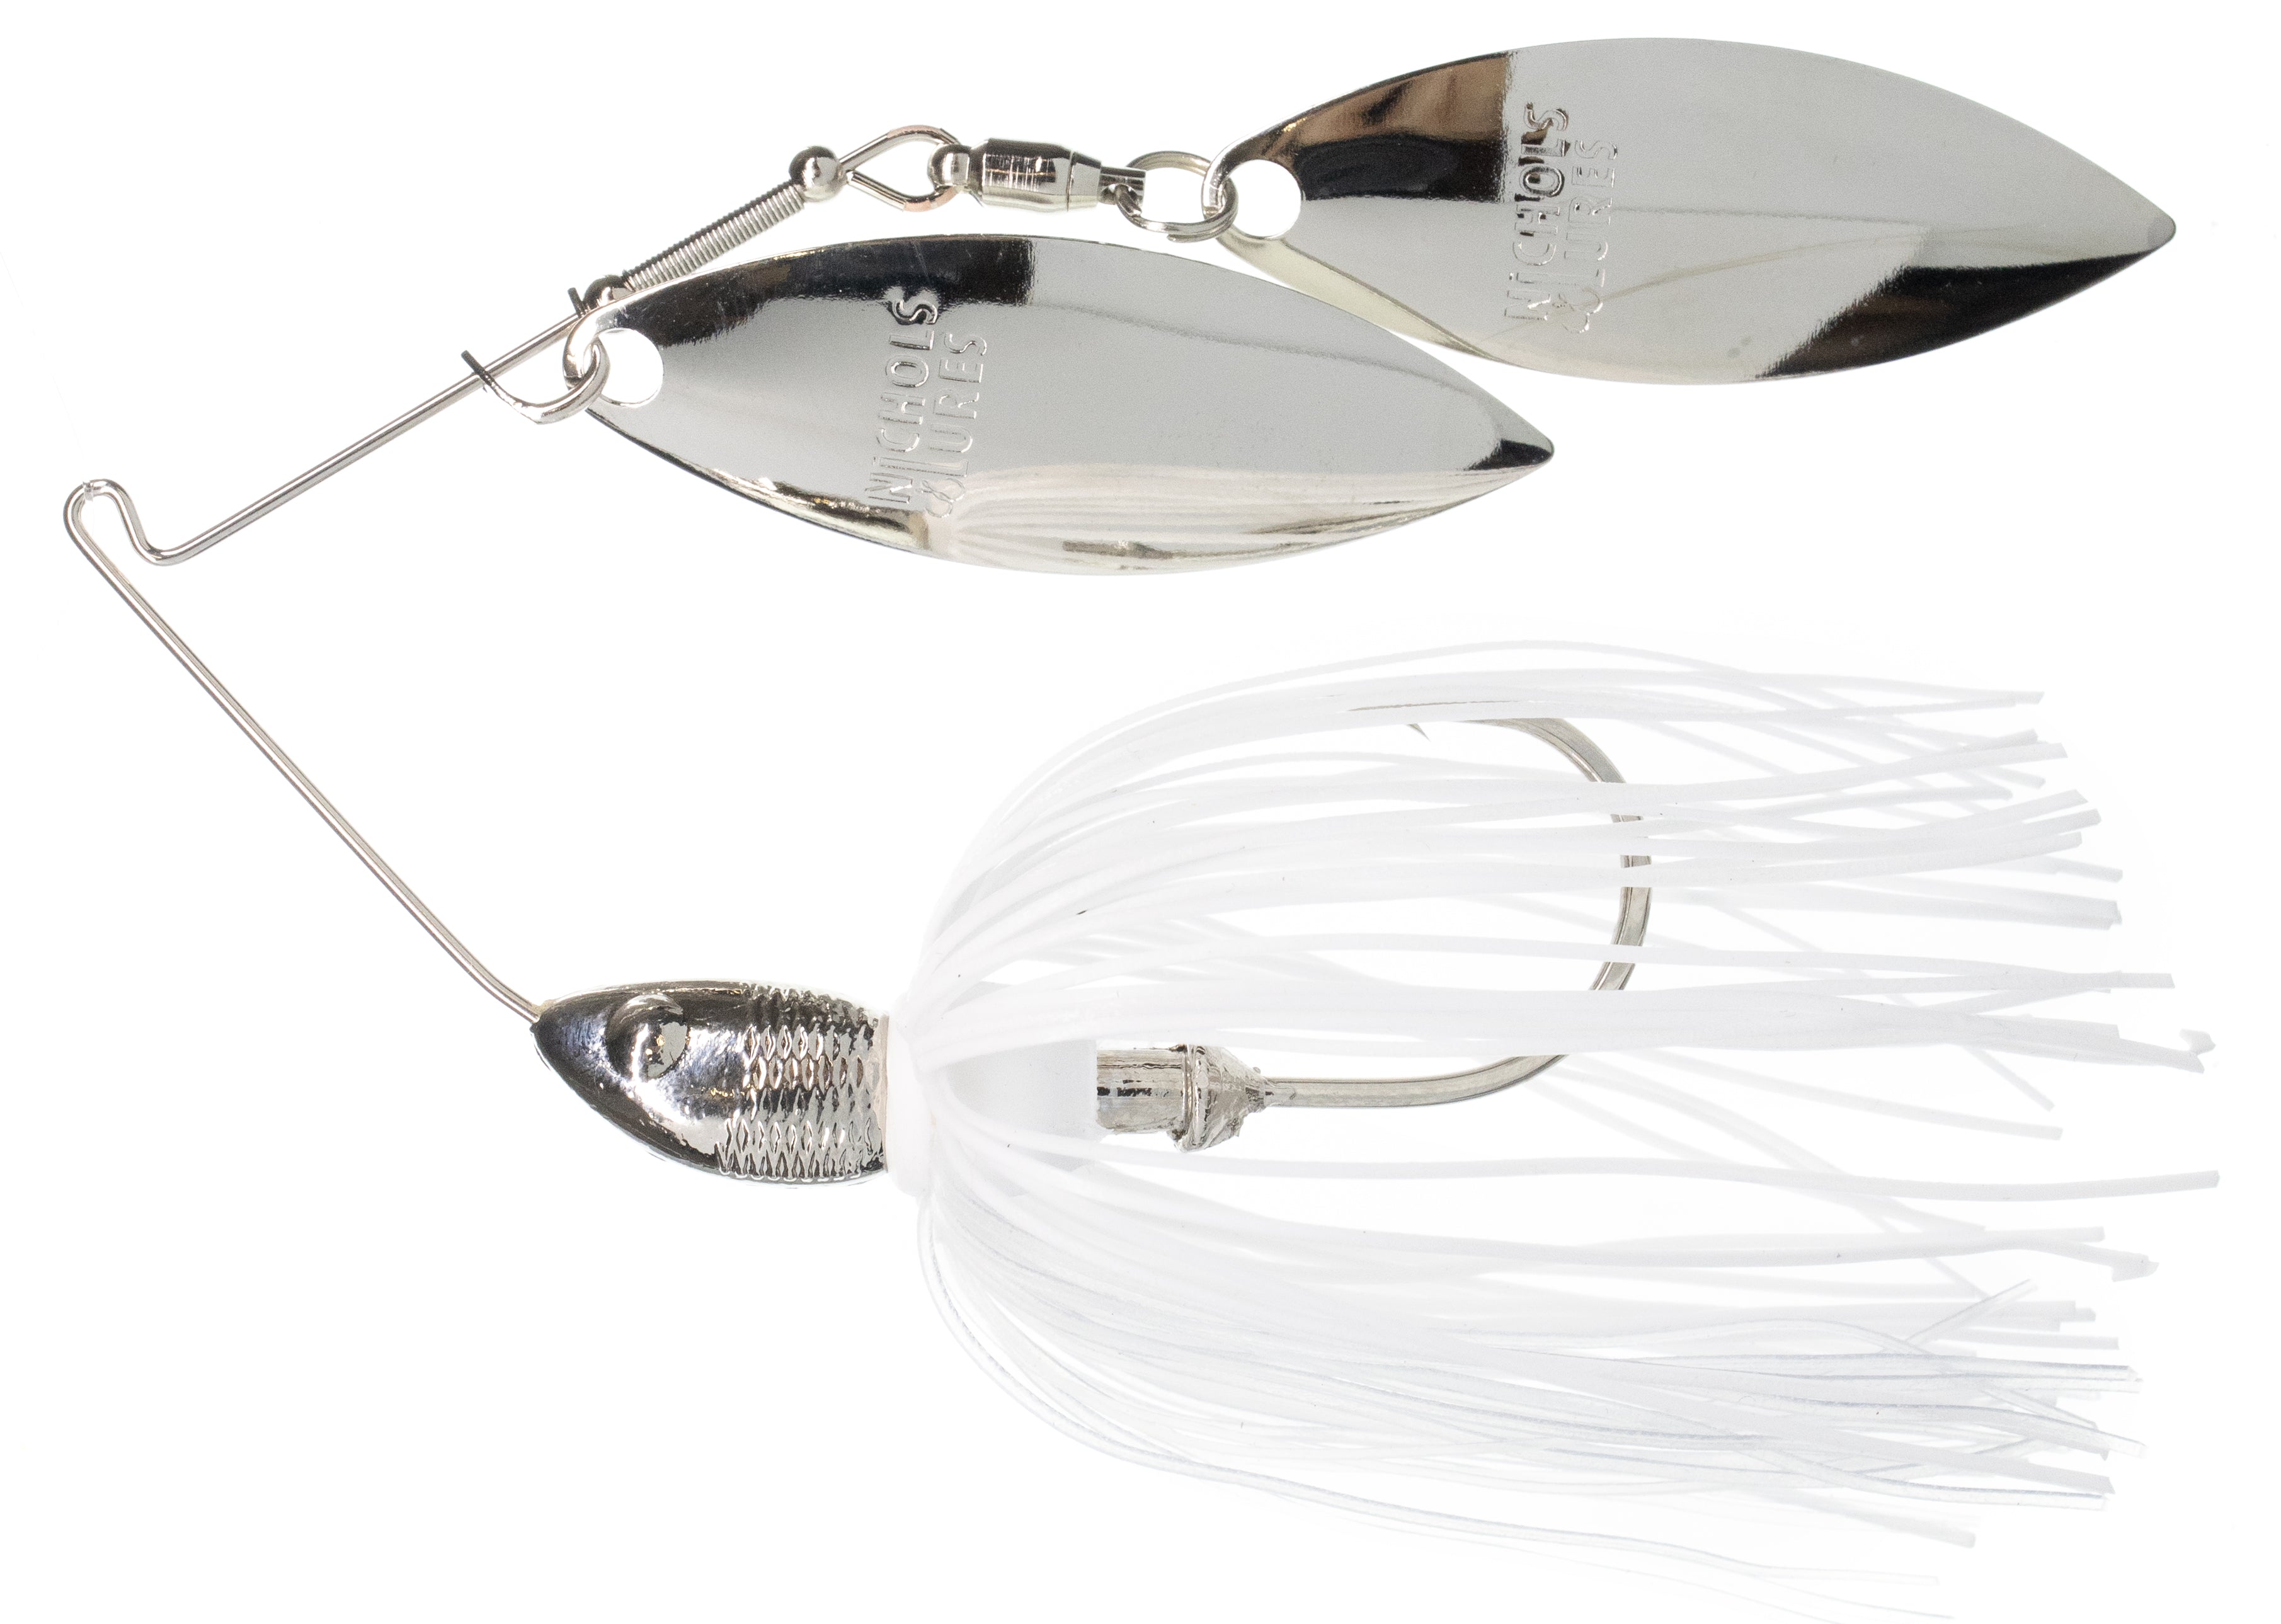 Nichols Lures Pulsator Metal Flake Double Willow Spinnerbait, White/Chartreuse, 1/2-Ounce